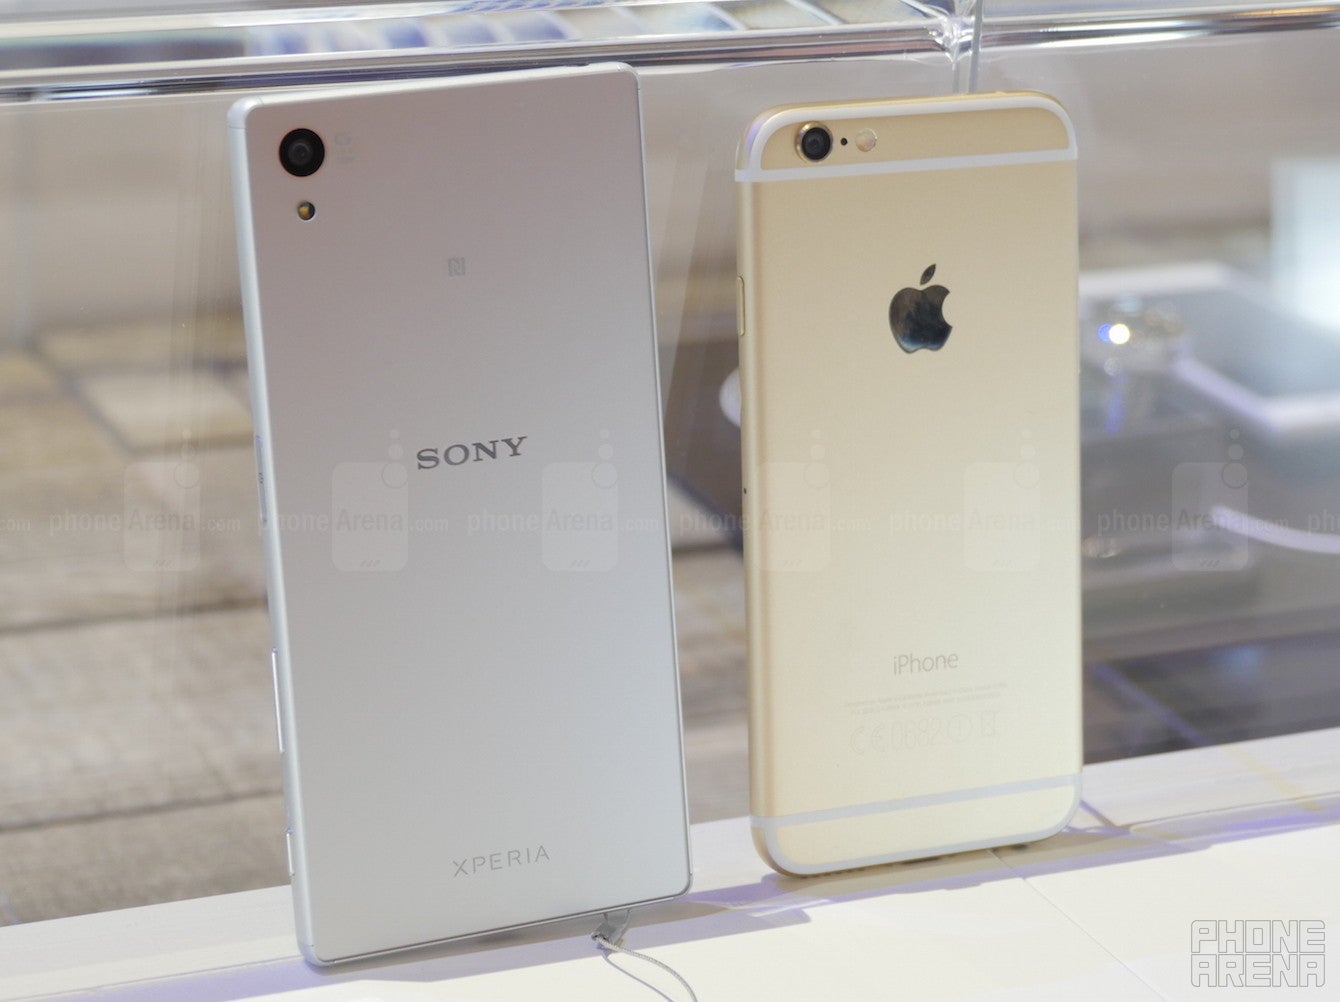 Sony&#039;s moving on to a 23 MP sensor in the Xperia Z5 - Sony Xperia Z5 hands-on: long time no see